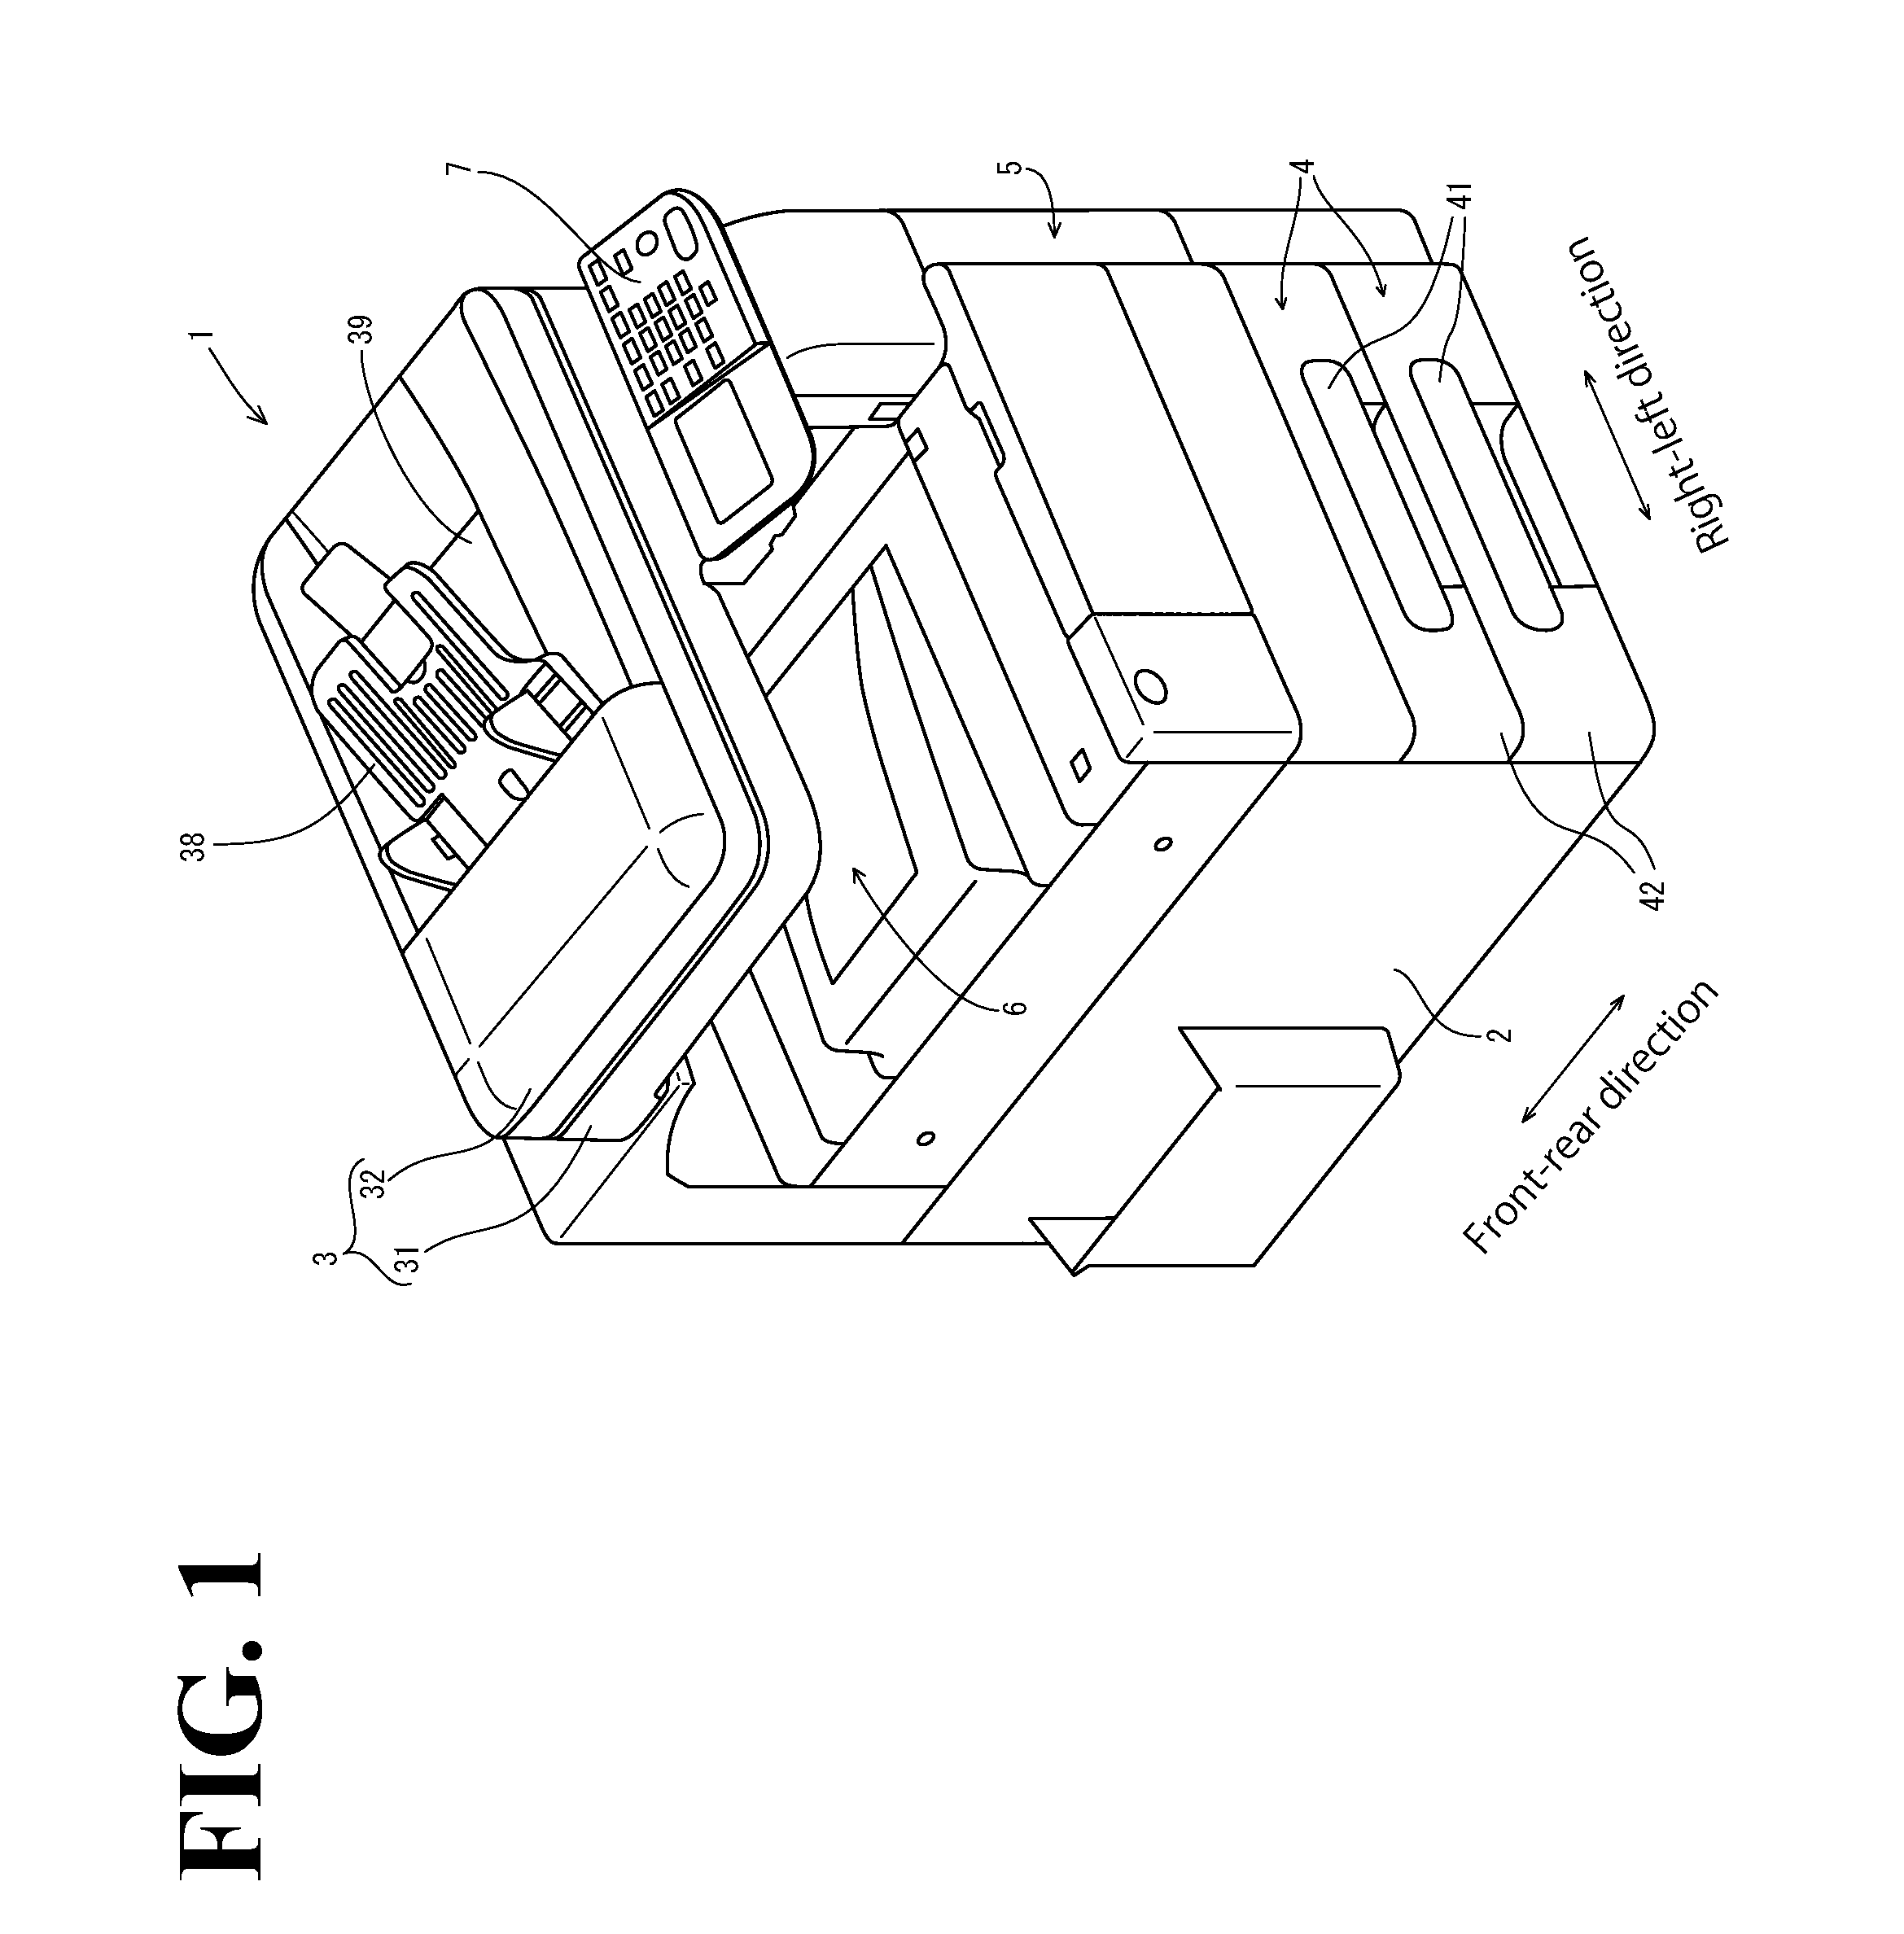 Paper feeder and image forming apparatus